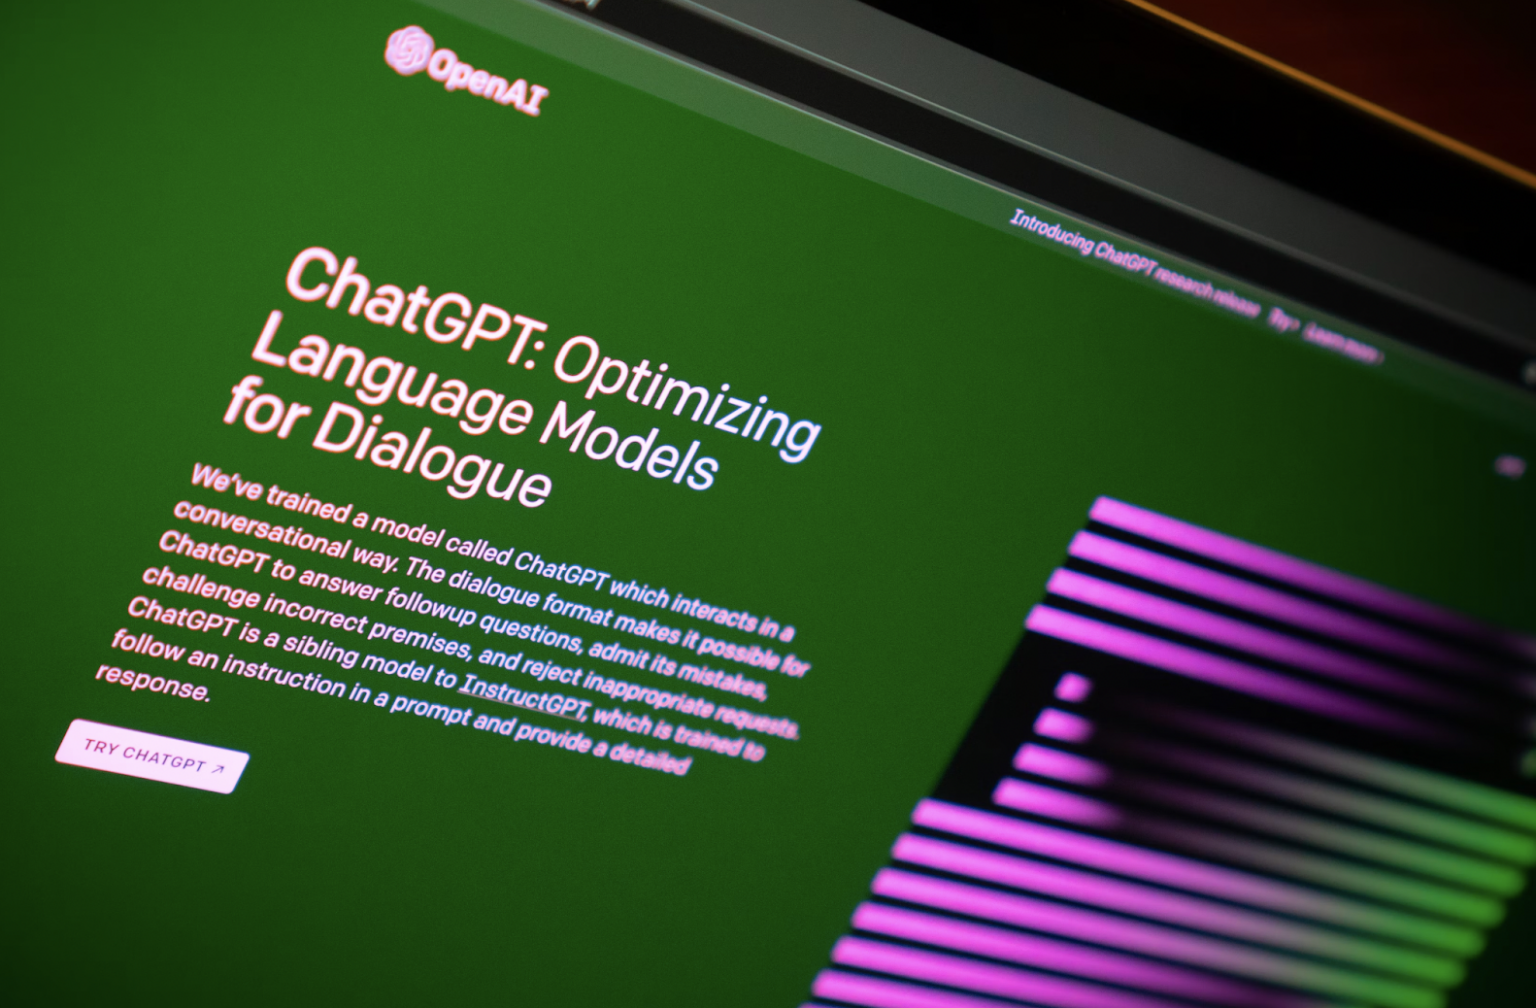 Chatgpt homepage on a computer screen